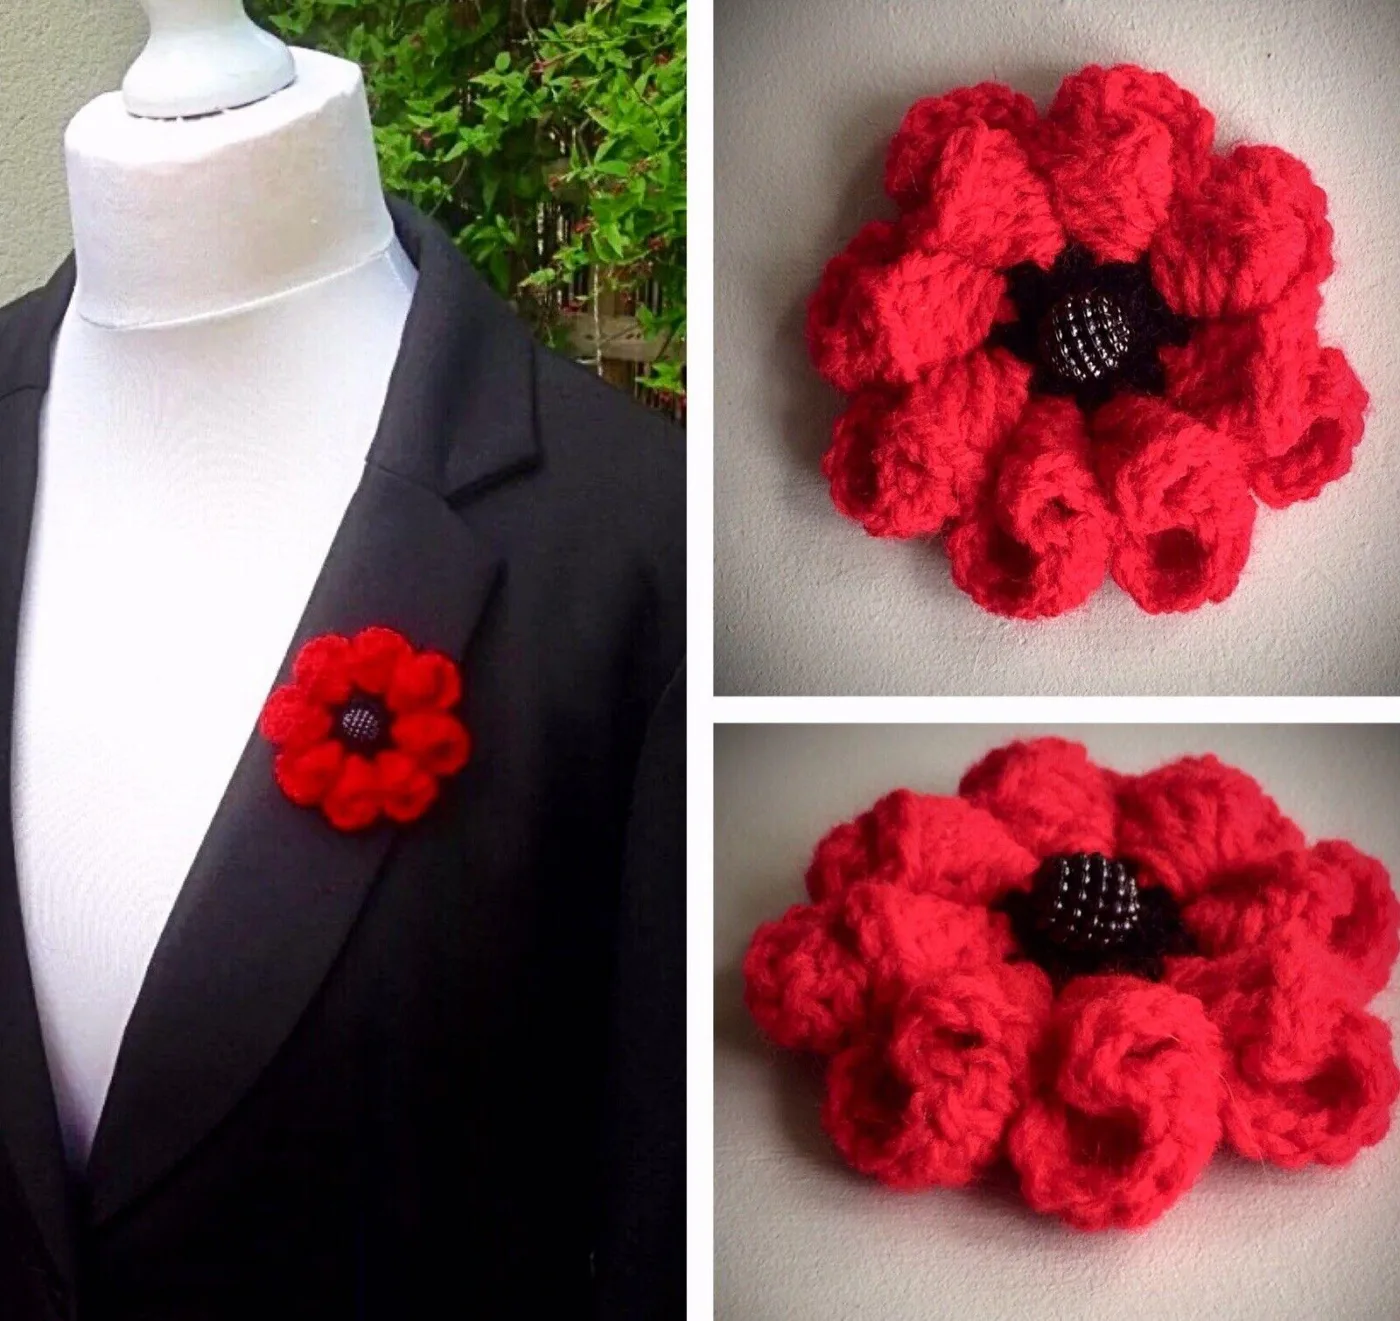 Knitted crocheted 3d poppy montage